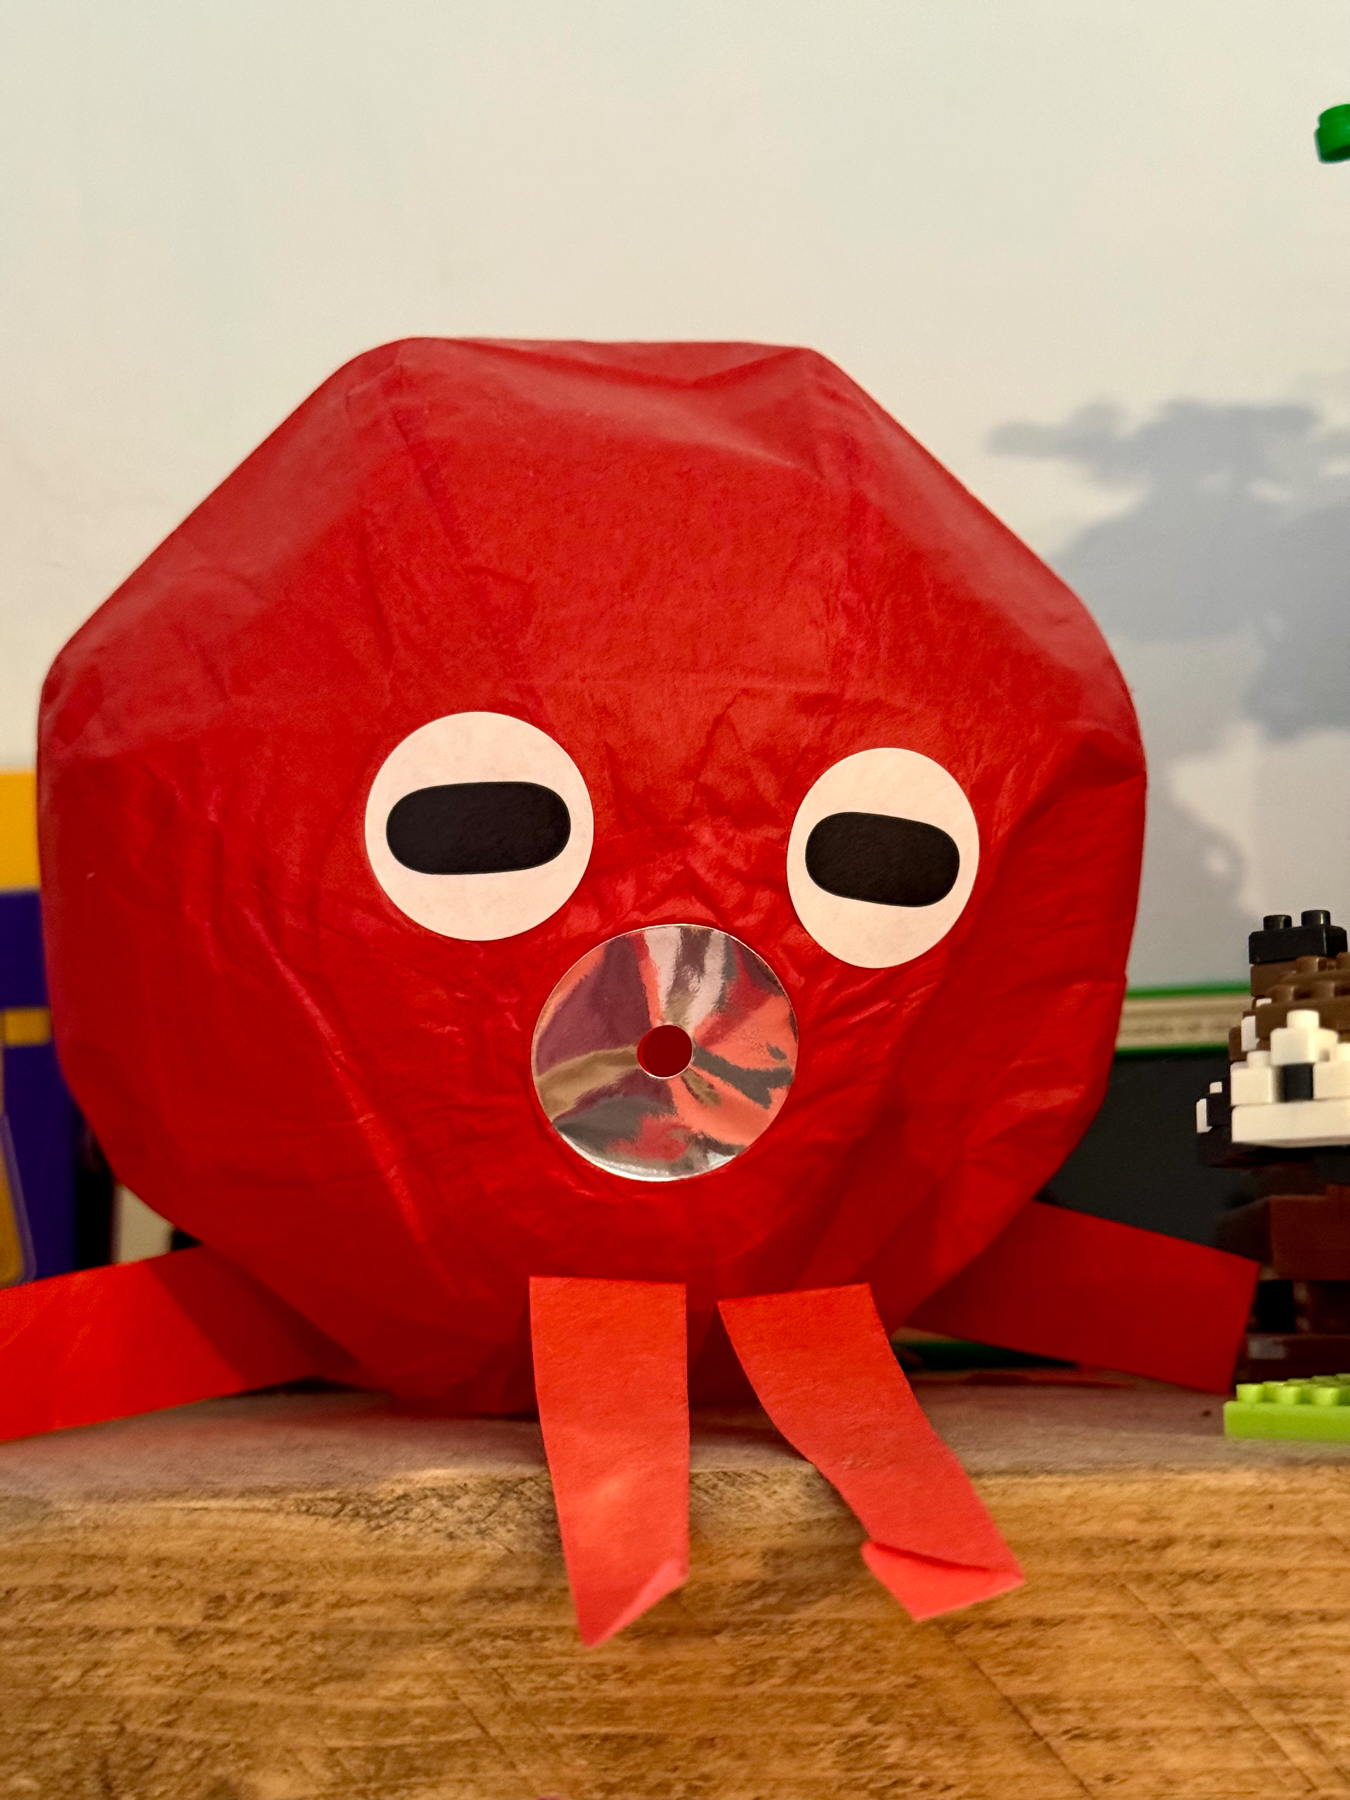 A red octopus crafted from paper materials, with white eyes, a circular clear plastic mouth, and tentacles arranged on a wooden surface.